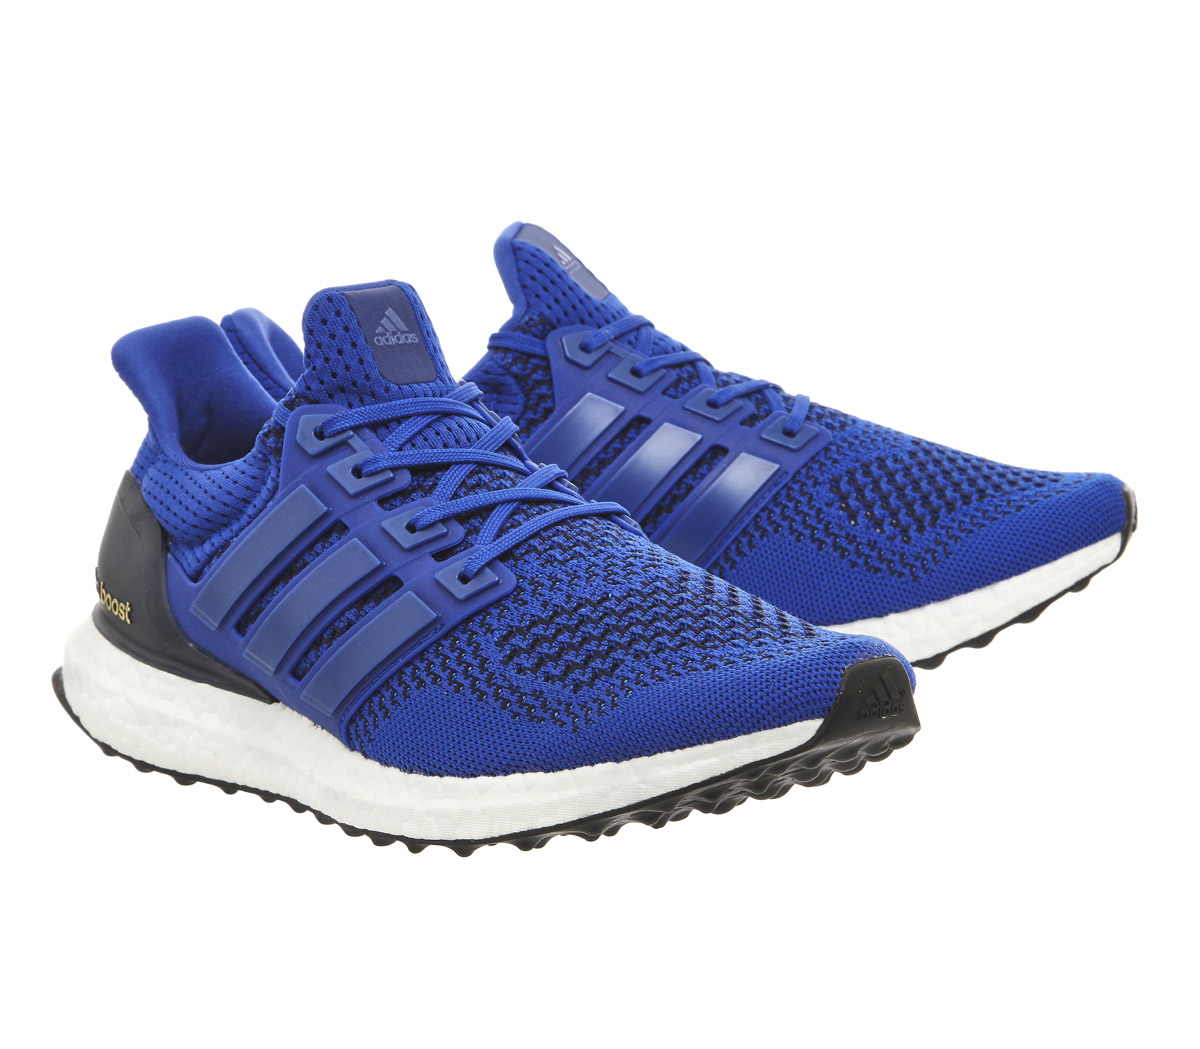 Lyst - Adidas Ultra Boost Trainers in Blue